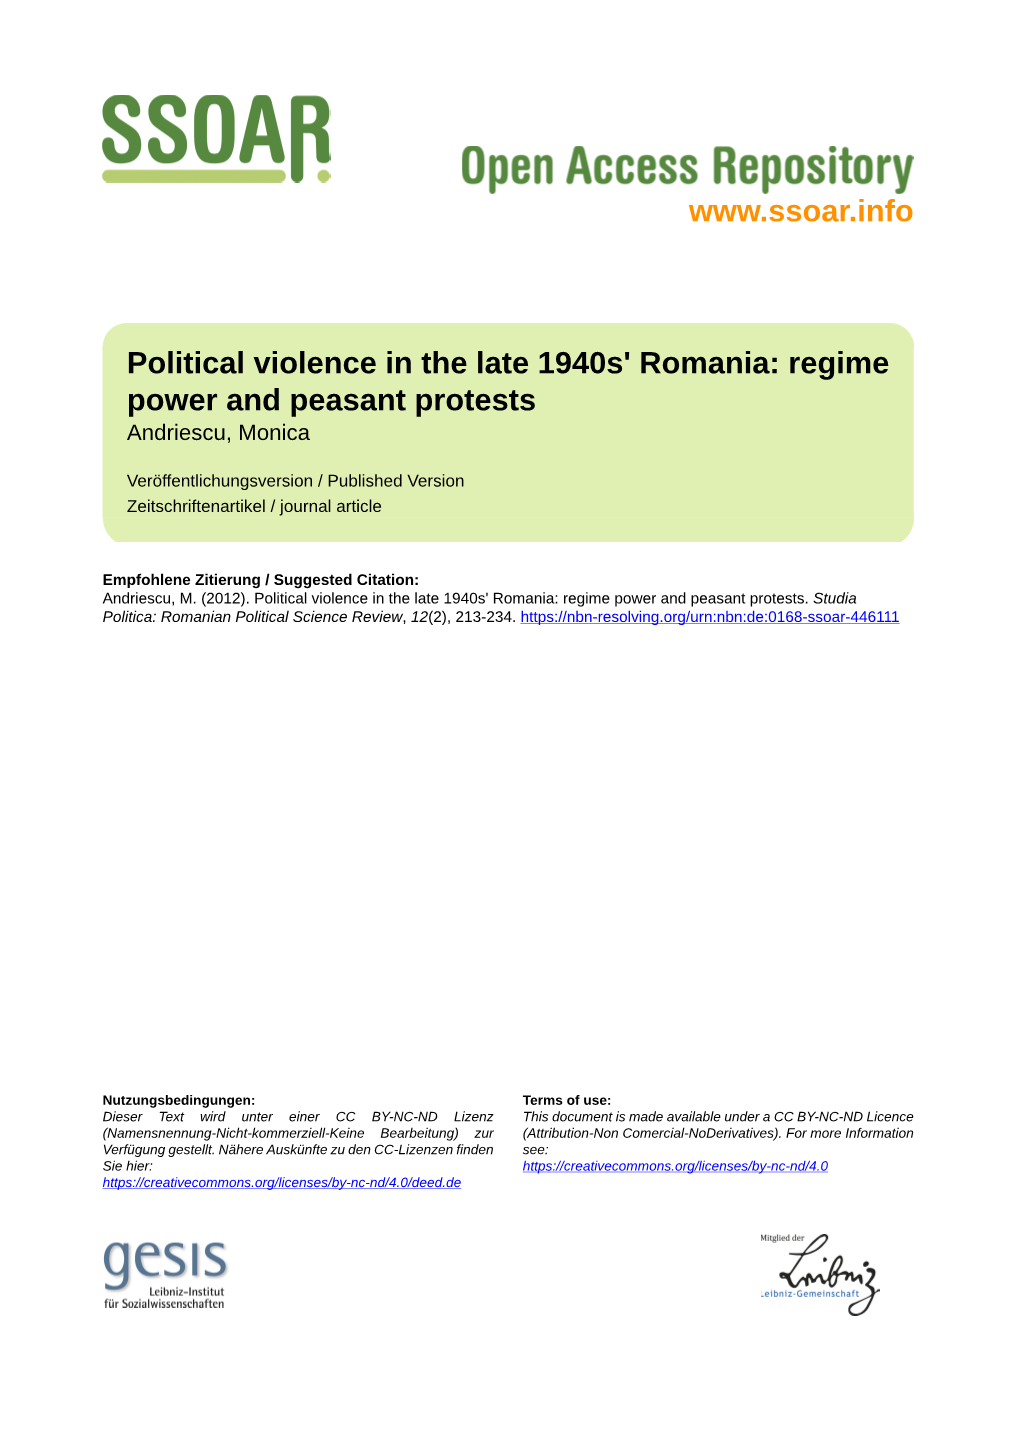 Political Violence in the Late 1940S' Romania: Regime